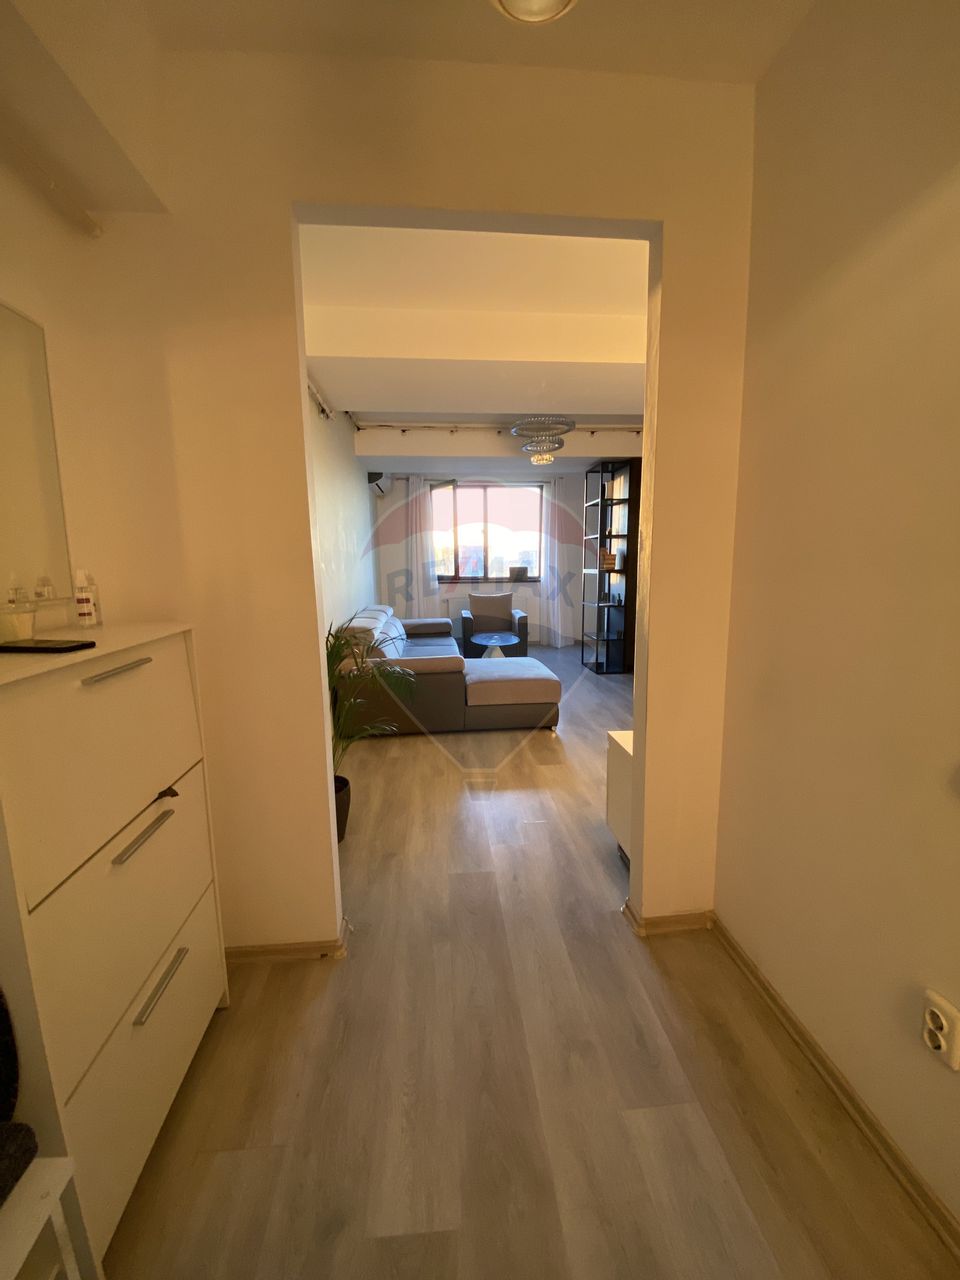 3 room Apartment for rent, Grozavesti area